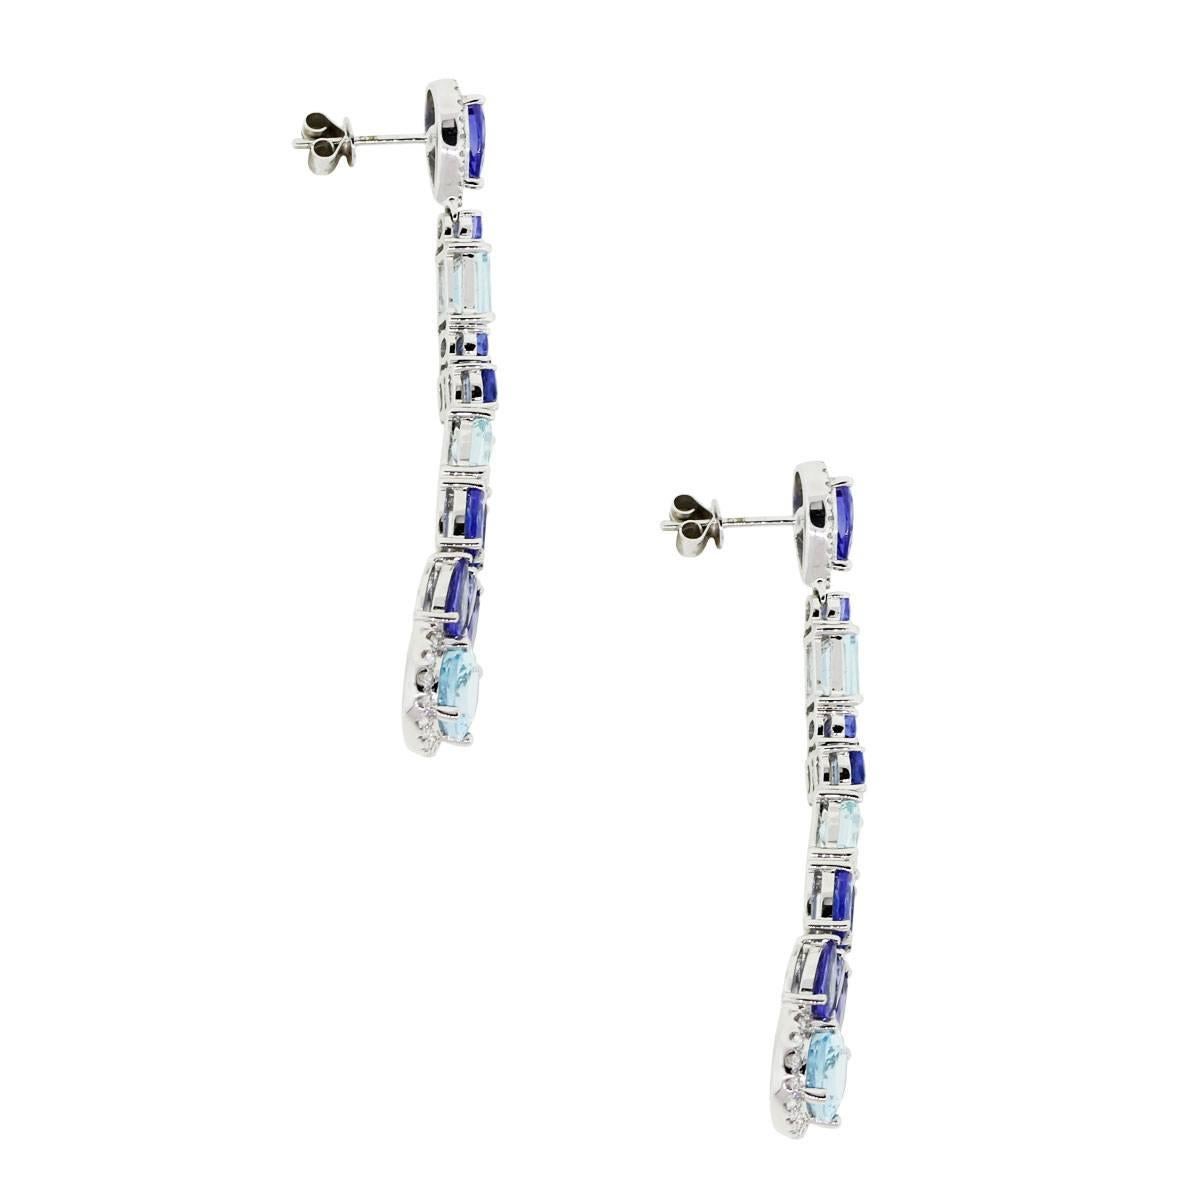 Material: 18k white gold
Diamond Details: Approximately 0.47ctw of round brilliant diamonds. Diamonds are G/H in color and VS in clarity
Gemstone Details: Approximately 4.32ctw of pear and oval shape tanzanites and 2.69ctw of oval and emerald shape